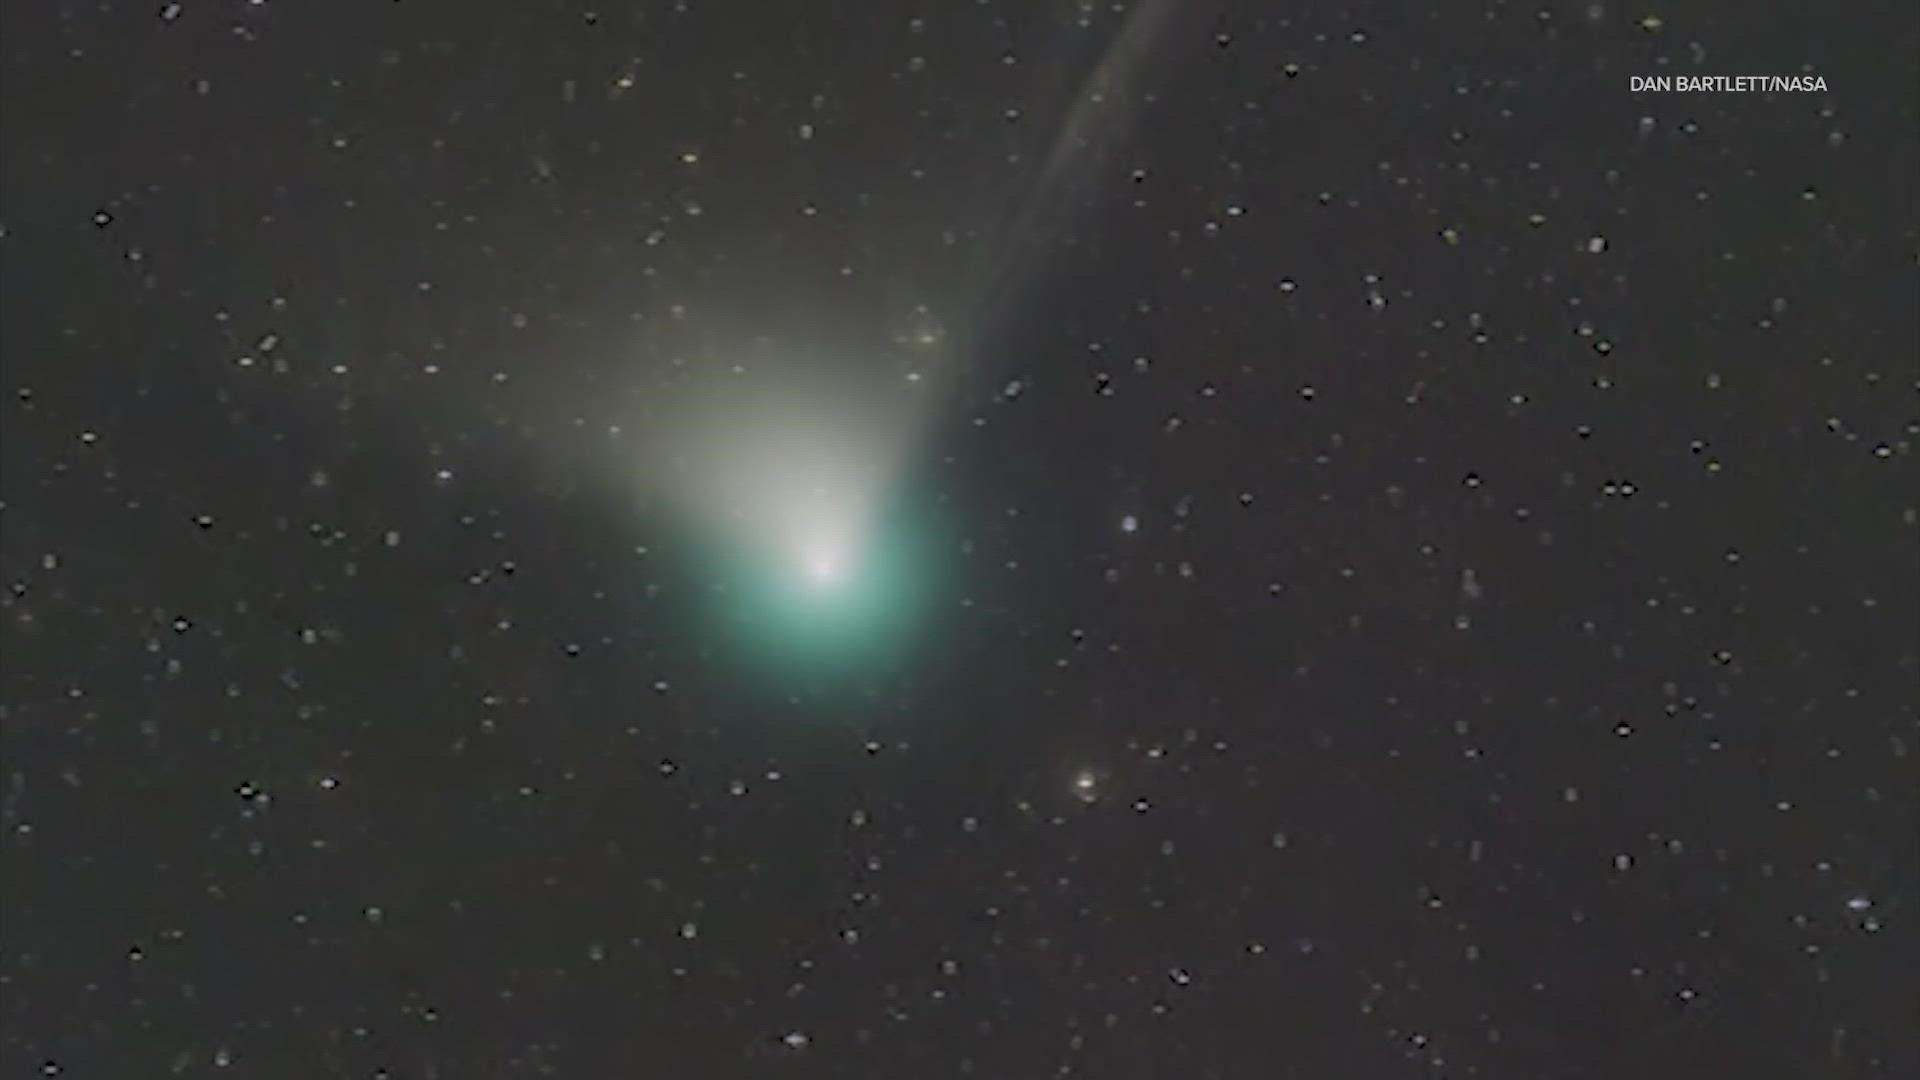 Keep your eyes on the sky as a rare green comet is set to zoom past Earth for the first time since the Stone Age.